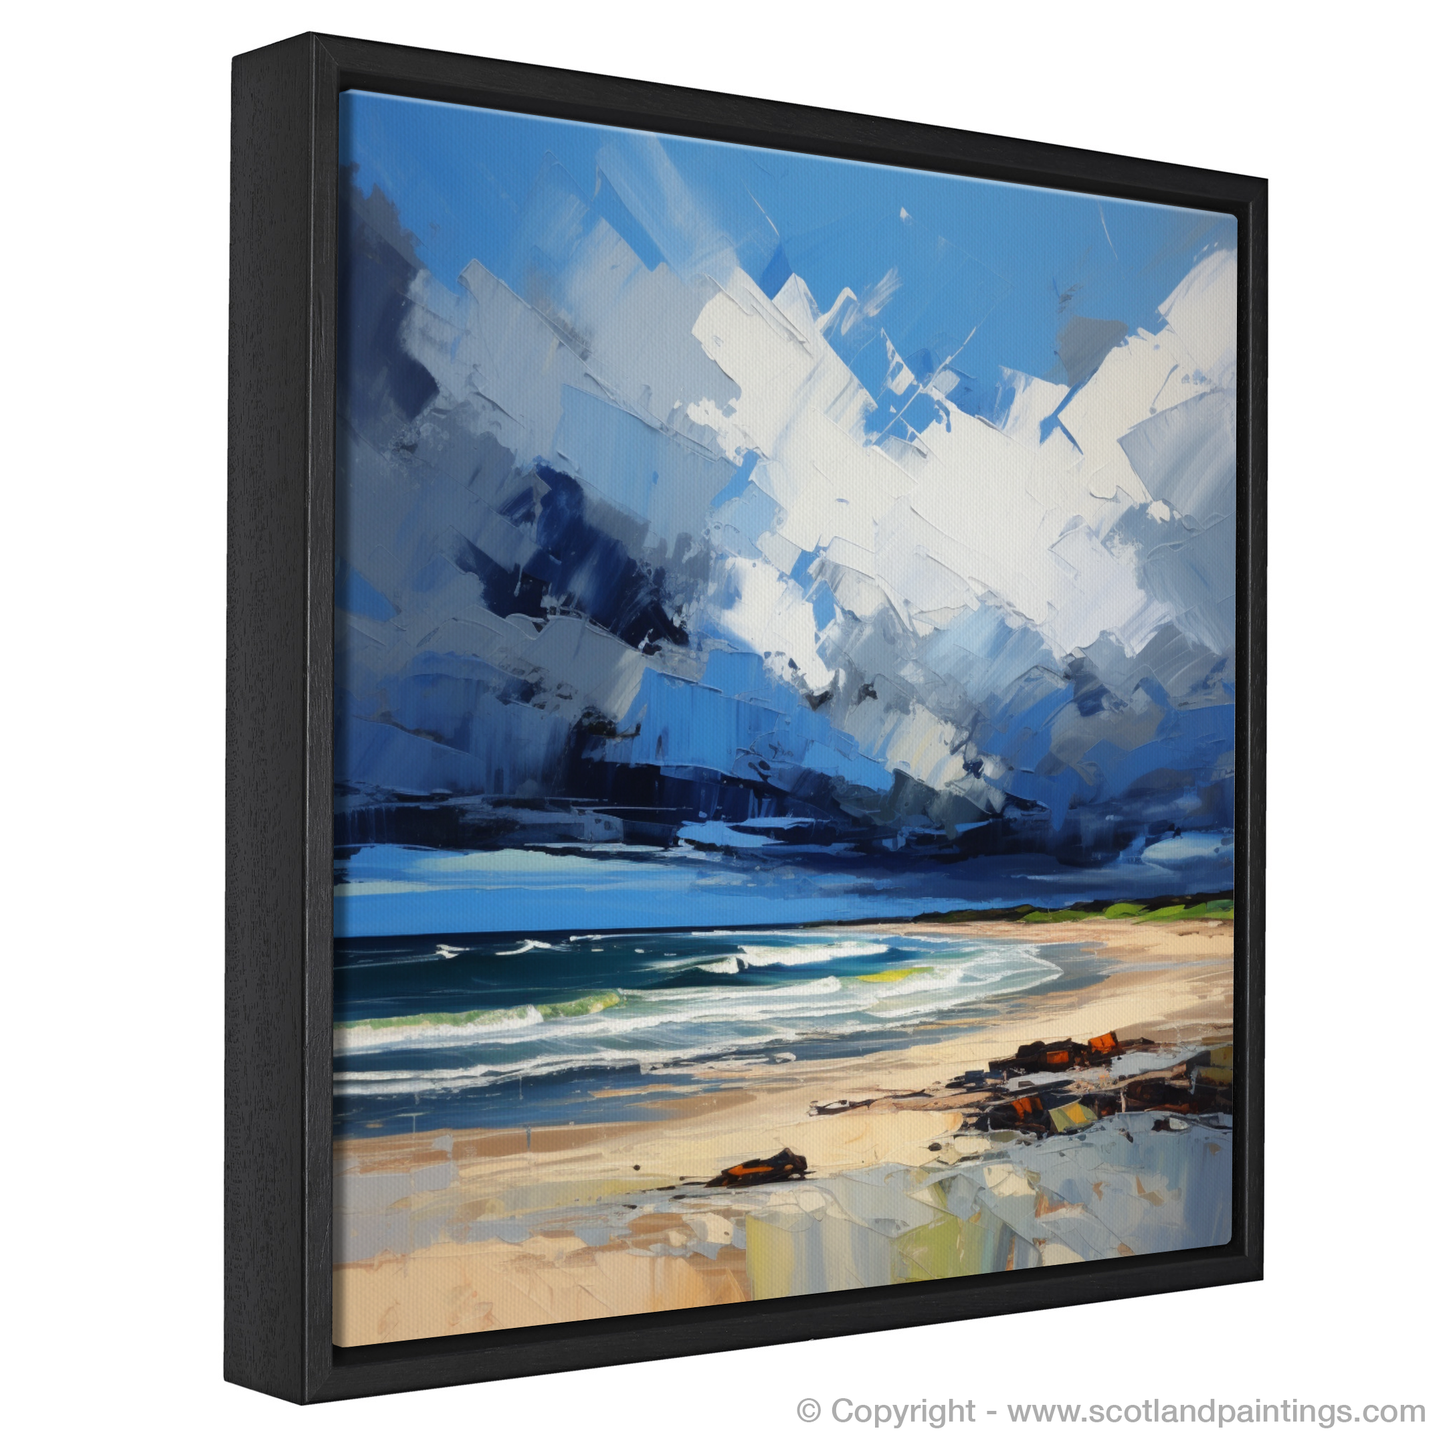 Painting and Art Print of Gullane Beach with a stormy sky entitled "Stormy Skies over Gullane Beach: An Expressionist Ode to Scotland's Coastal Majesty".